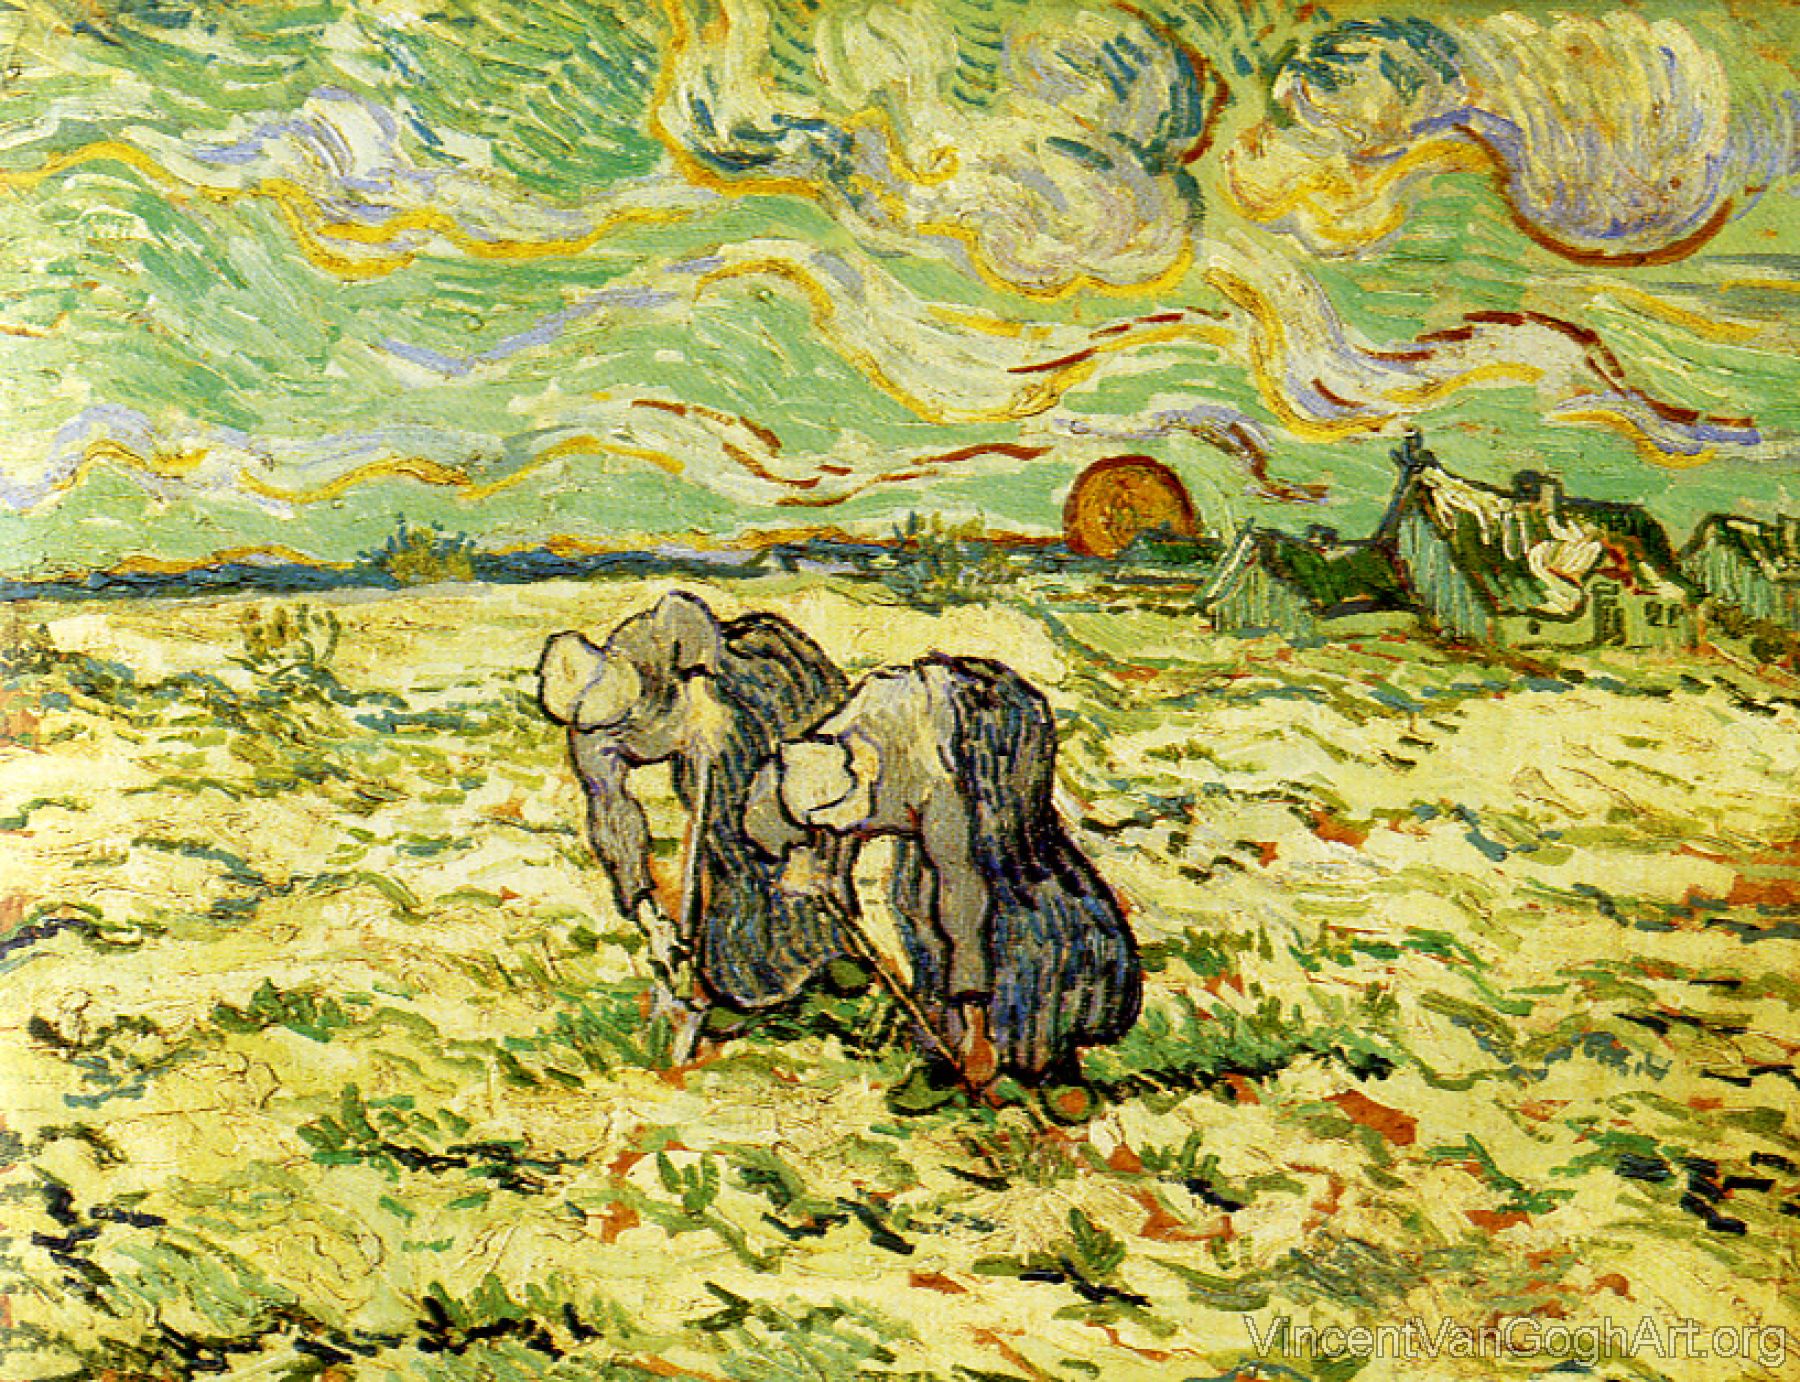 Two Peasant Women Digging in a Snow-Covered Field at Sunset